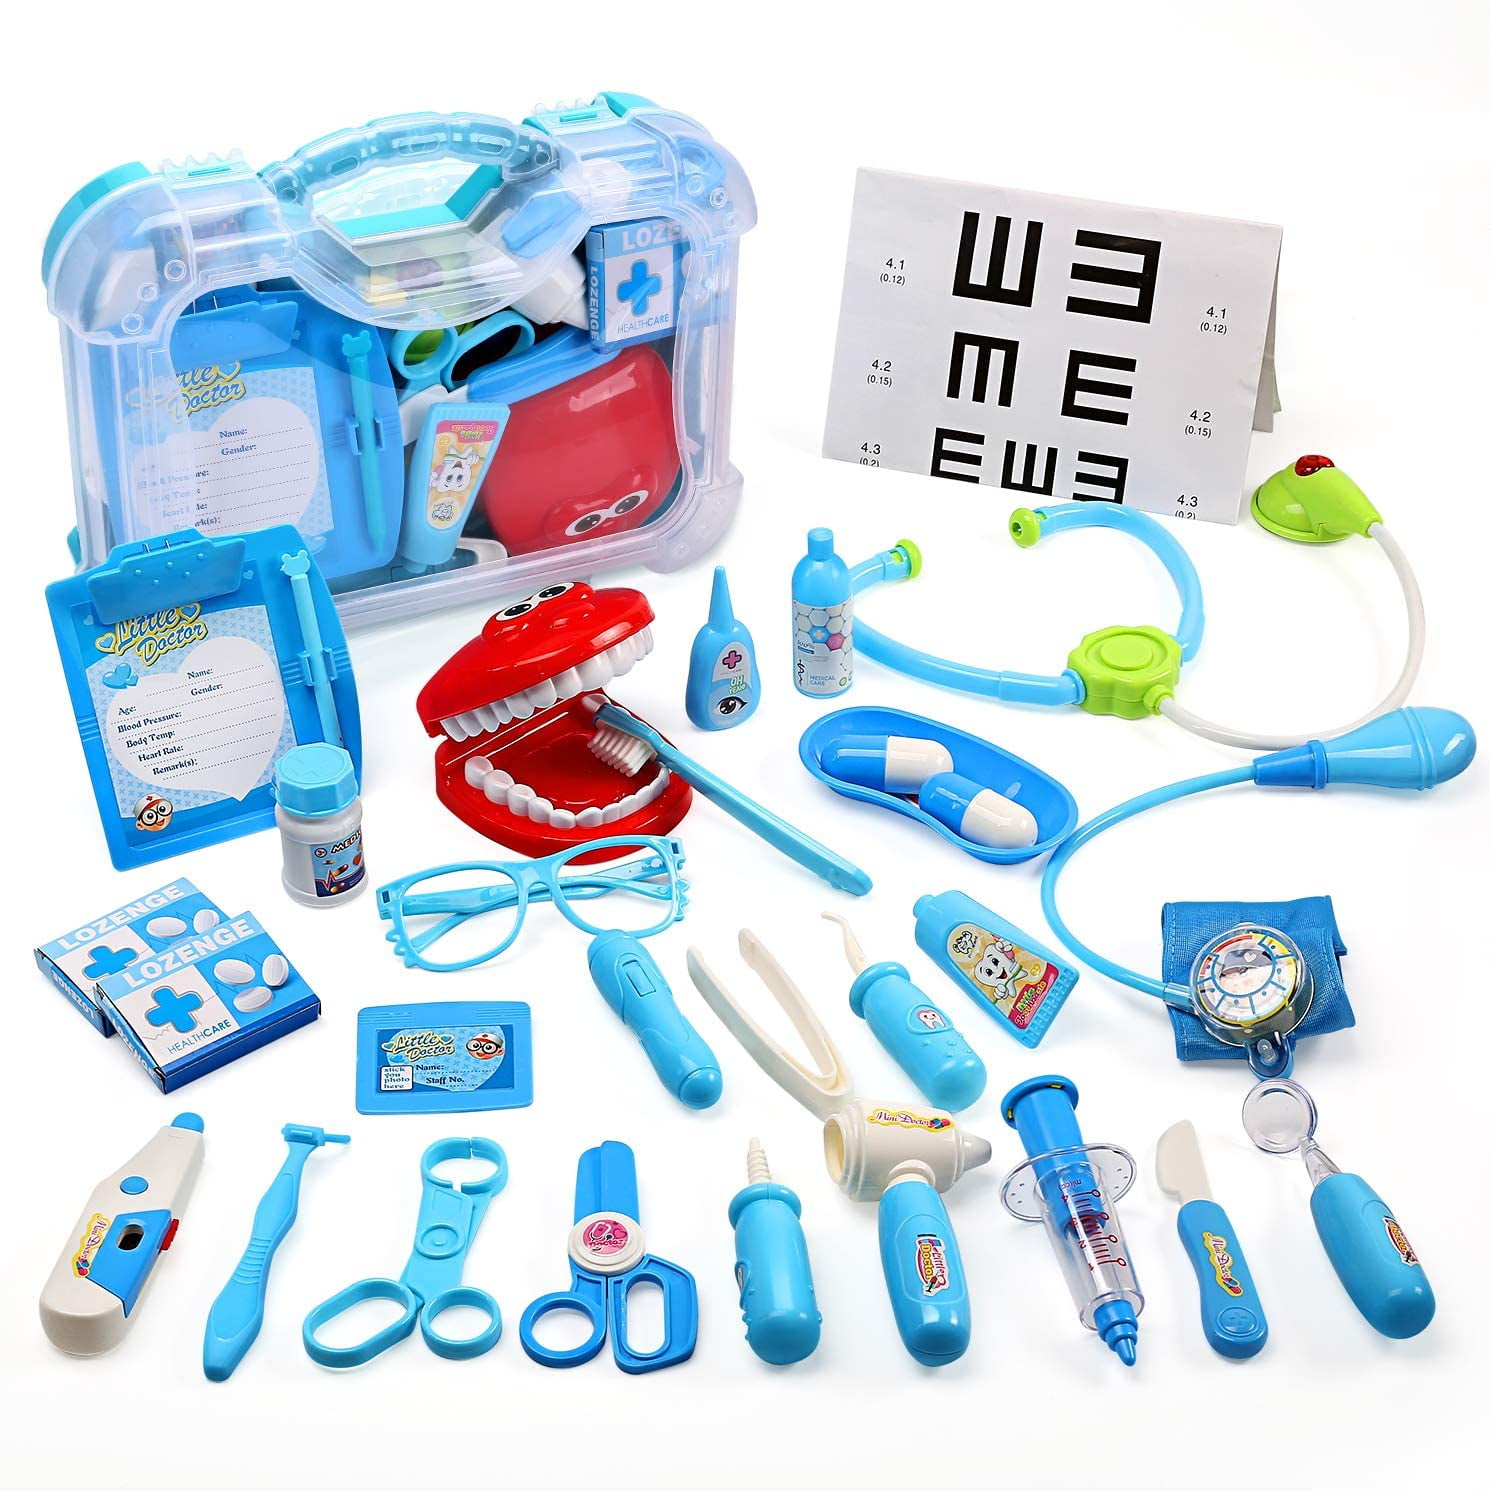 JoyStone Kids Toy Doctor Kit,30PCS Toy Medical Kits Pretend Play Dentist  Doctor Kits with Electronic Stethoscope and Carrying Case, Educational Toy